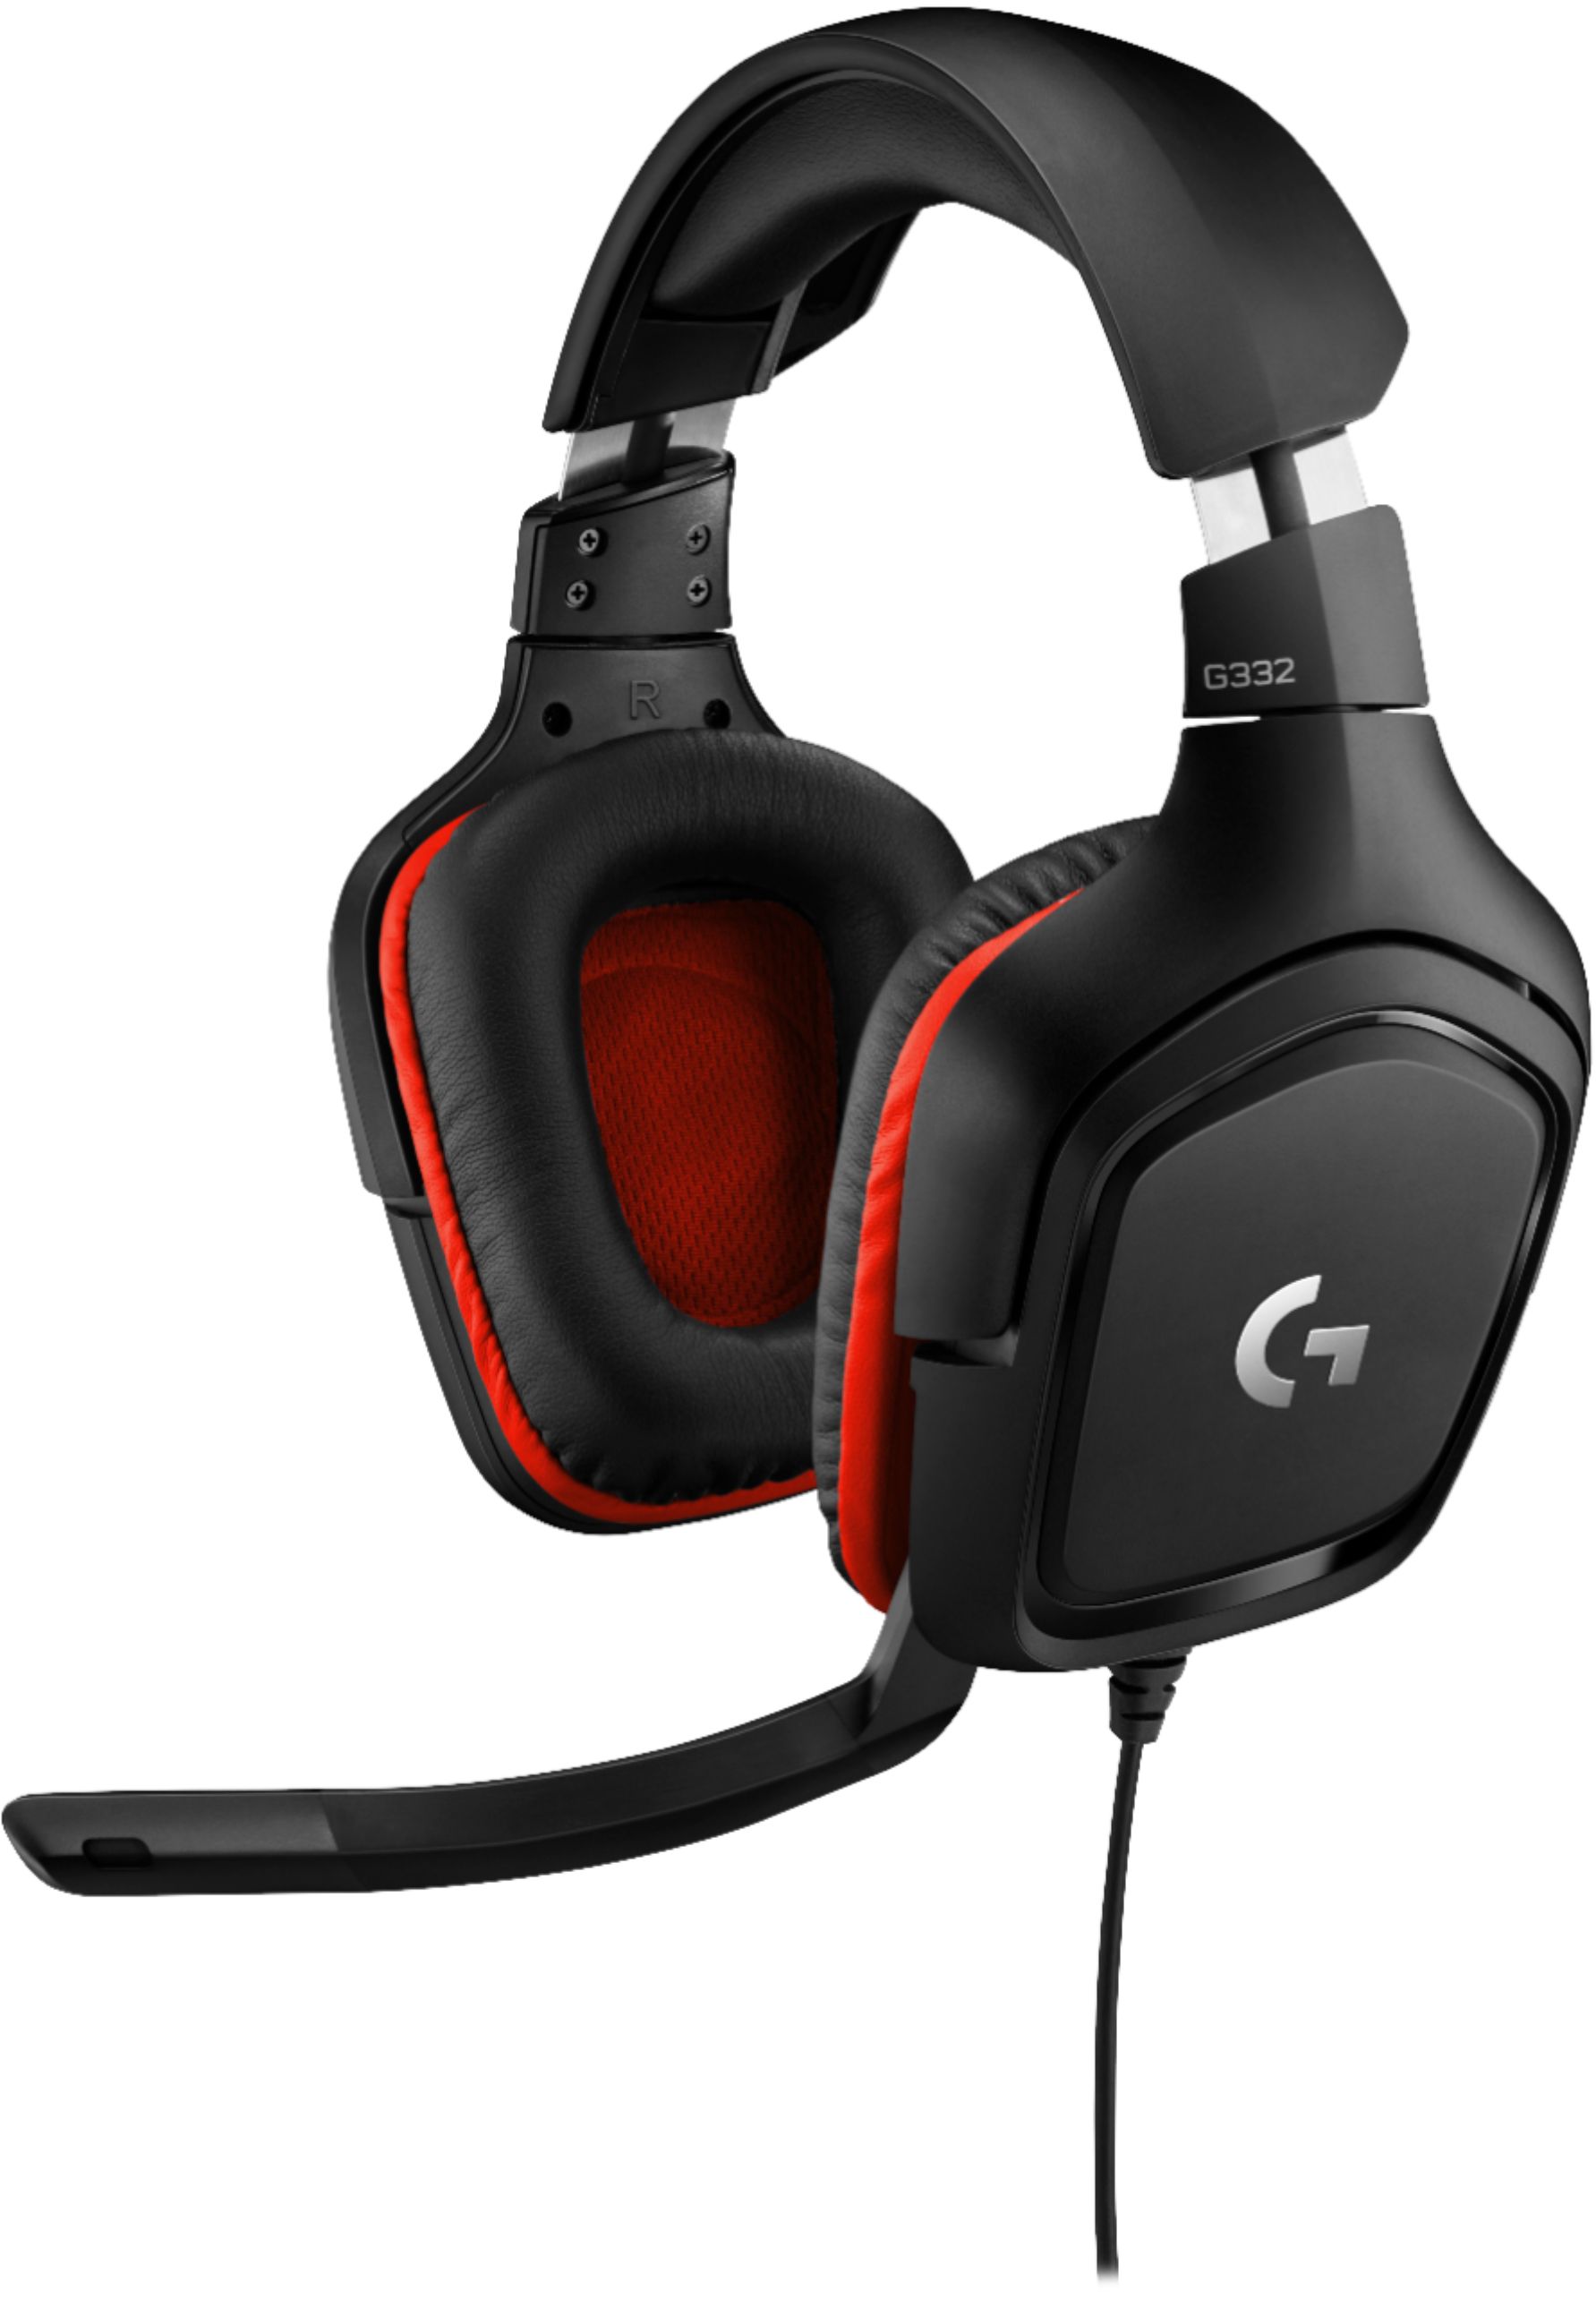 Angle View: Logitech - G332 Wired Gaming Headset for PC - Black/Red